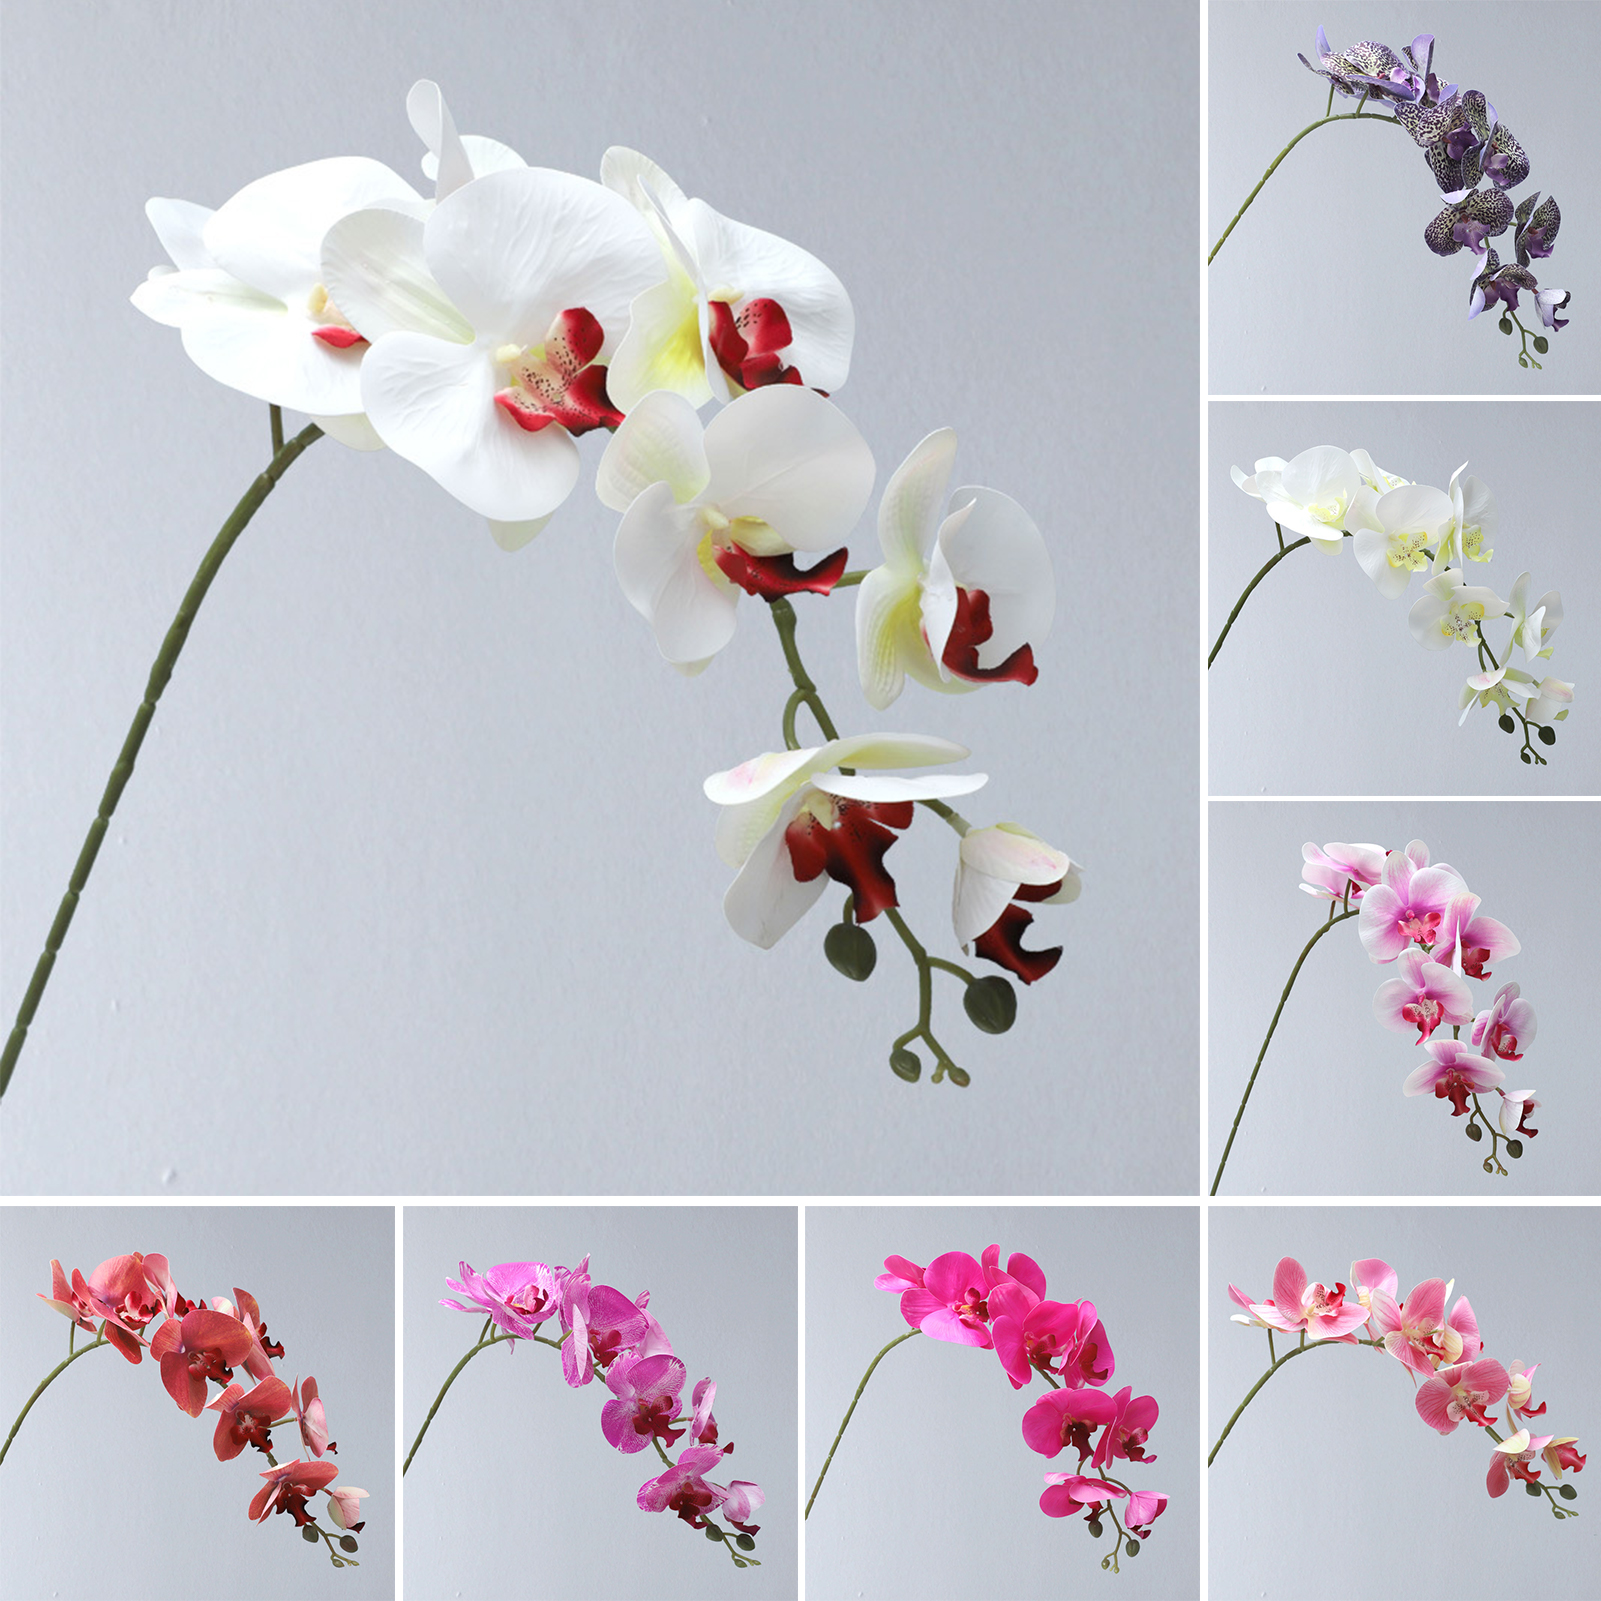 Yesbay 9 Heads Fake Phalaenopsis Multi-fork Handcraft Artificial Butterfly Orchid for Home - image 4 of 8